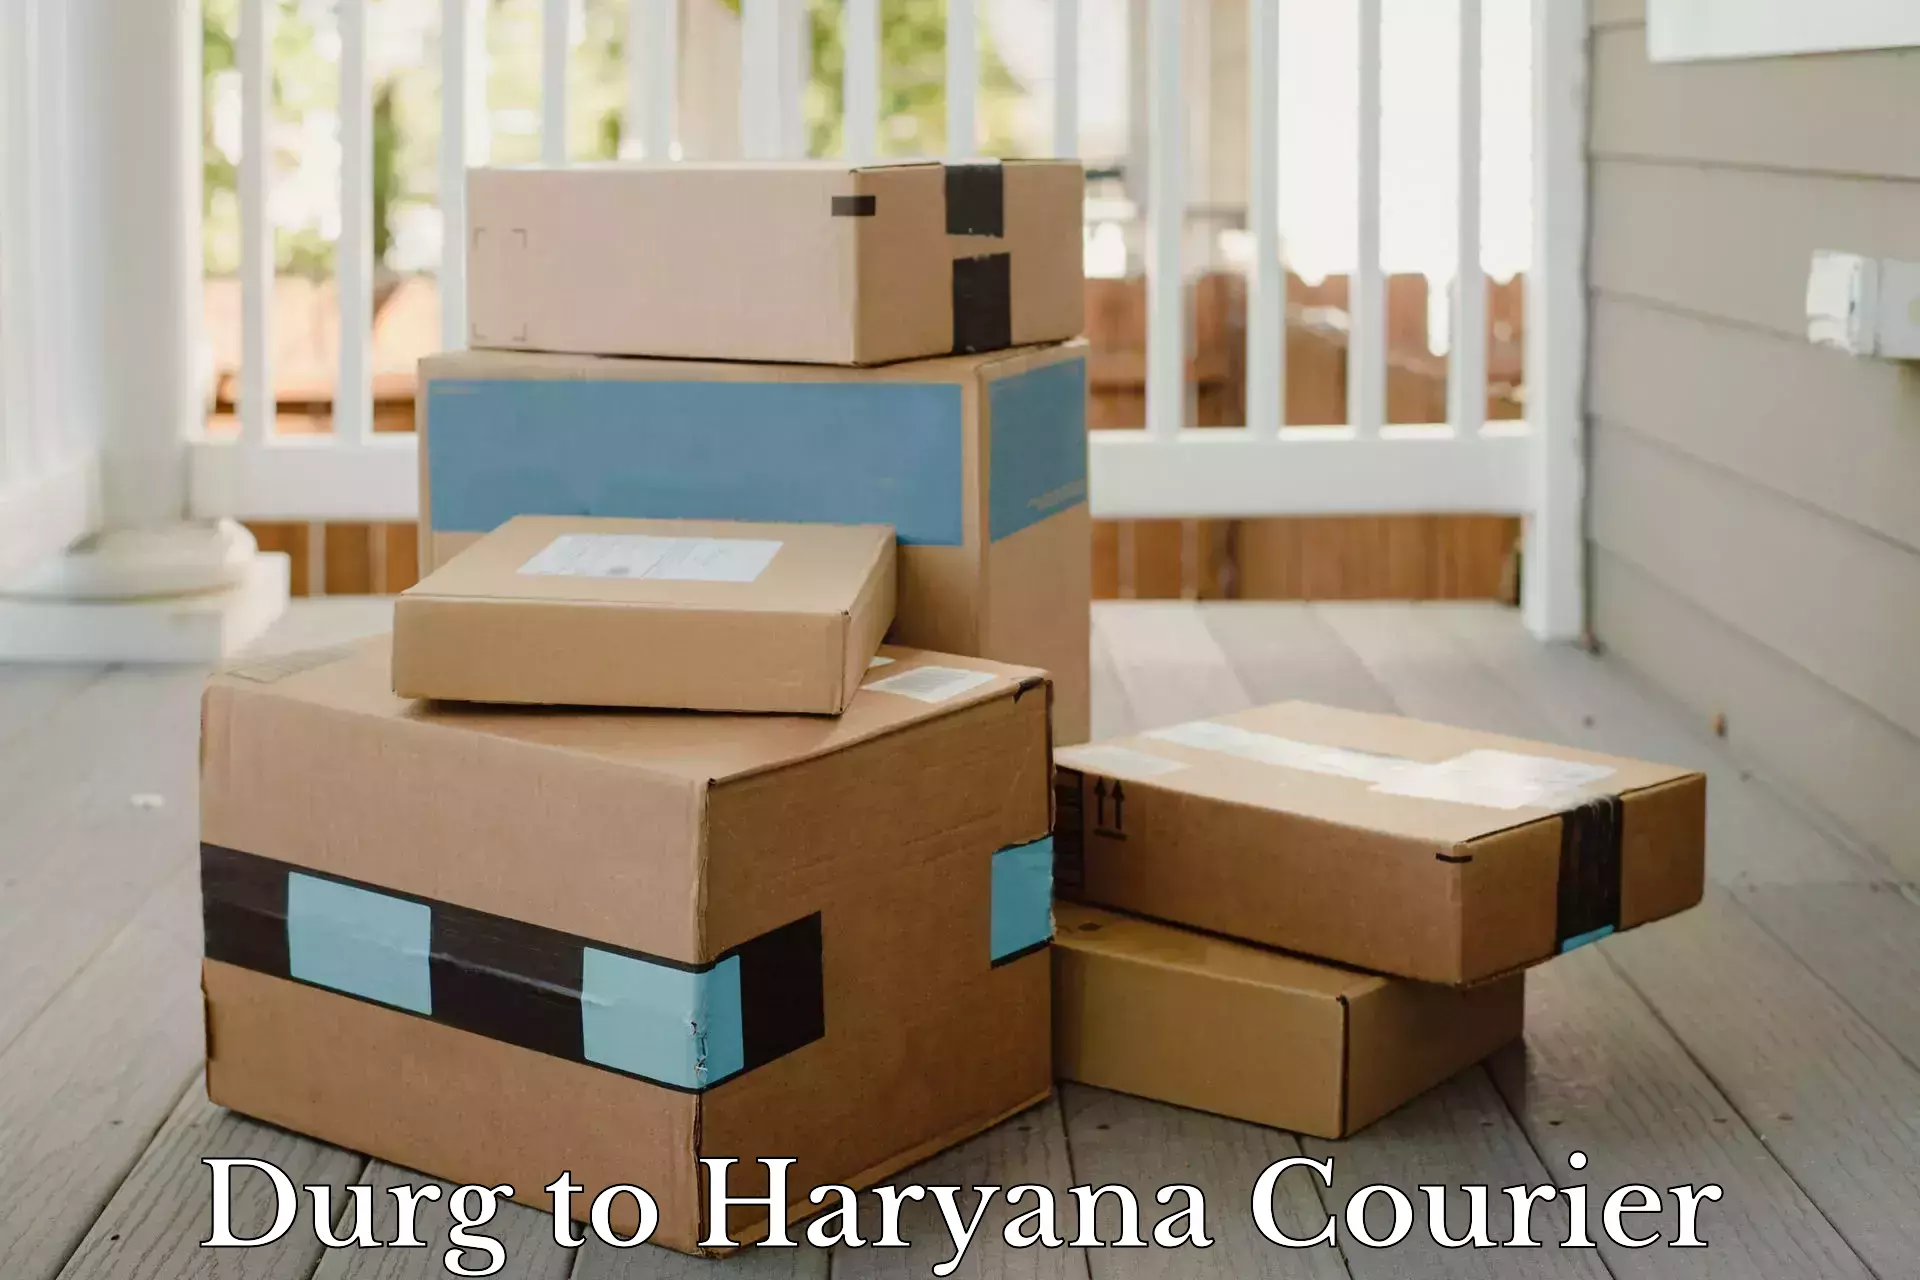 Efficient order fulfillment Durg to NCR Haryana